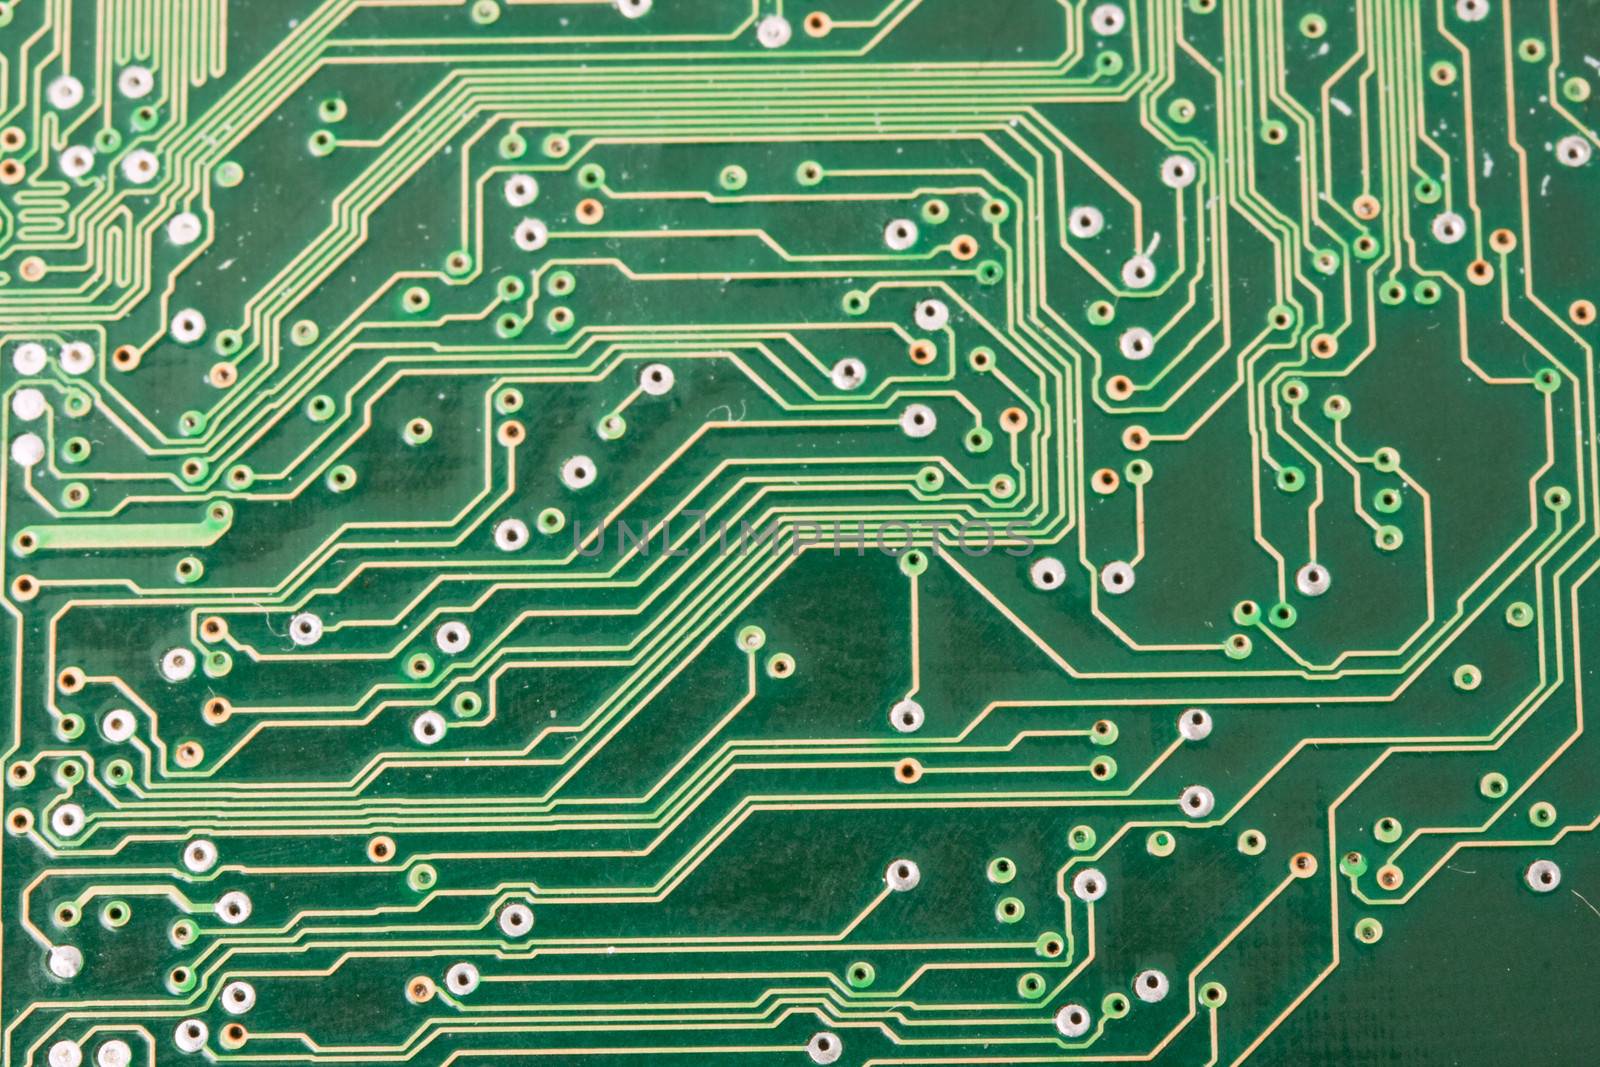 Close-up photo of electronic circuit board with integrated microchips